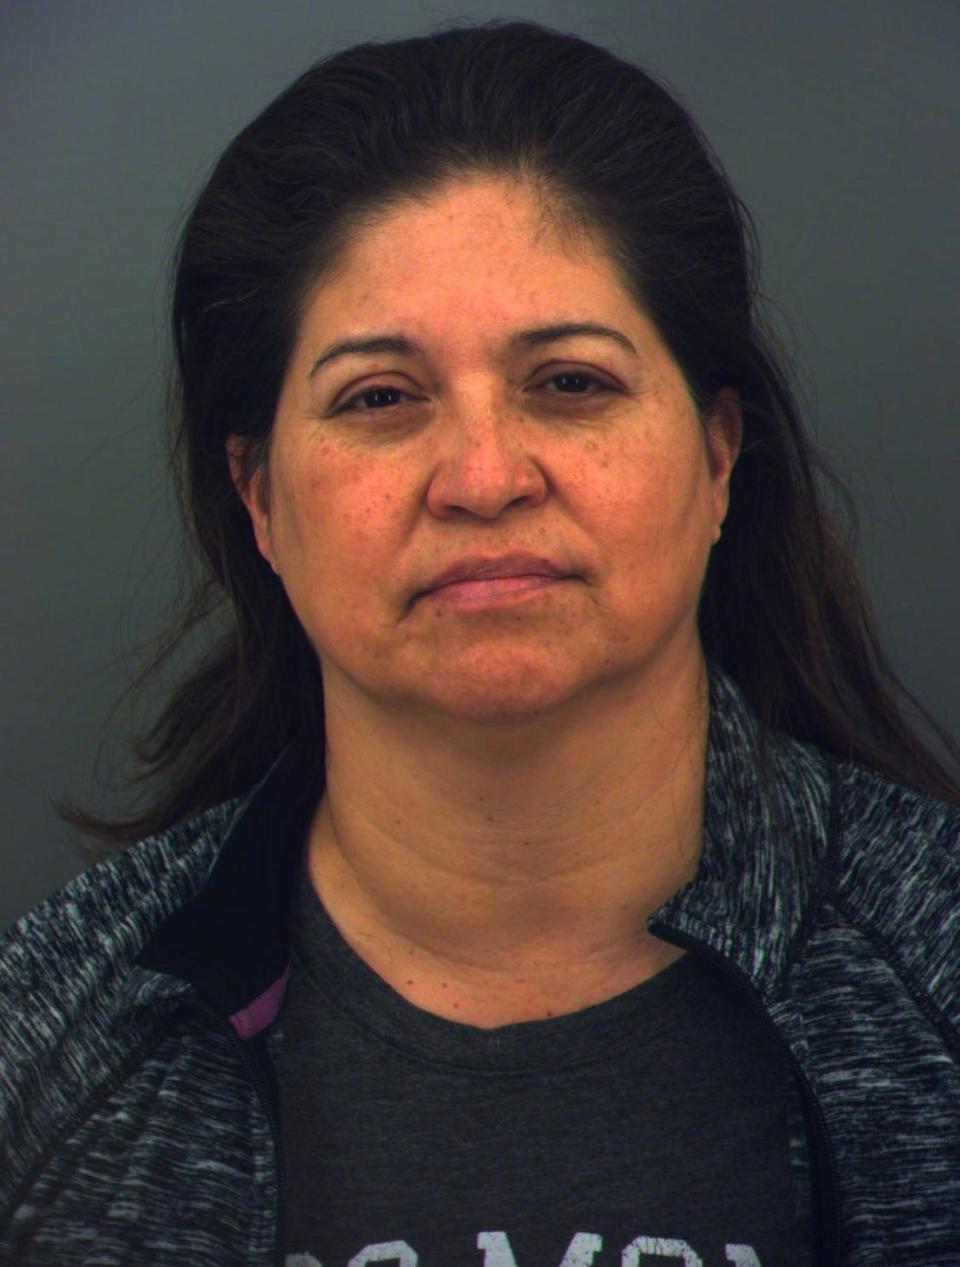 Rachel Montellano, 58, is accused of having an improper relationship with a student.